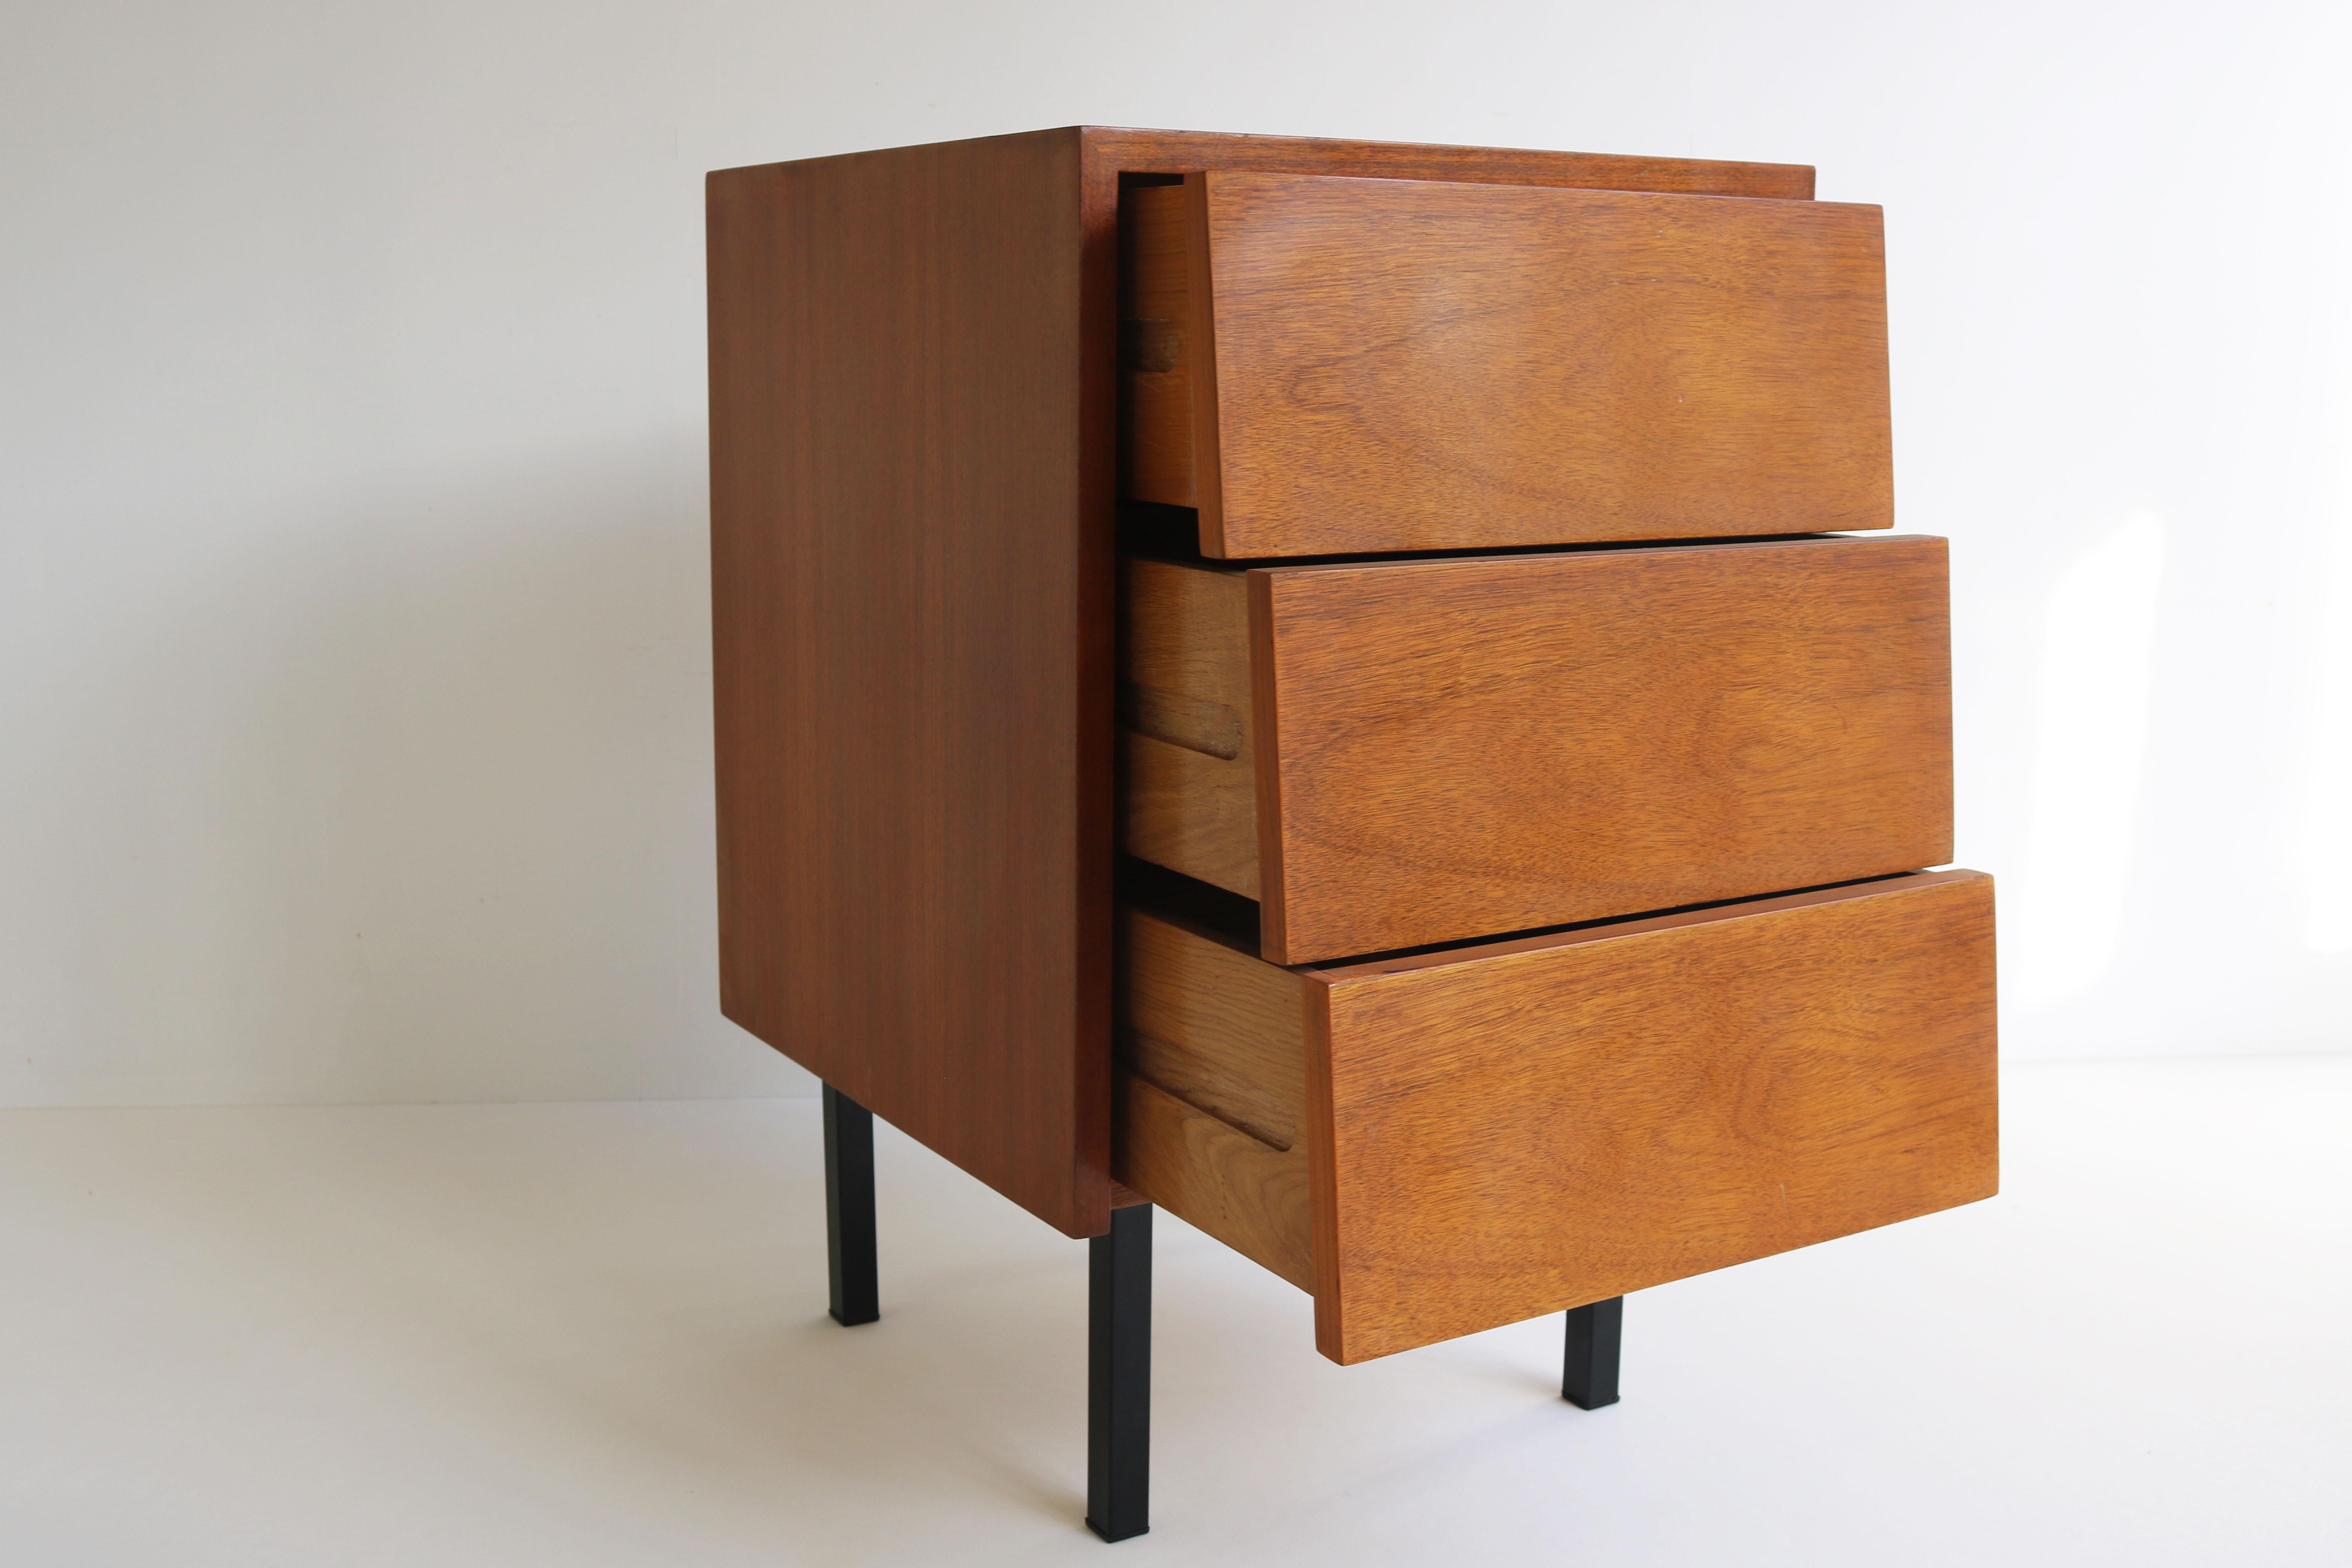 Minimalist dresser / night stand by Florence Knoll for Knoll in 1950s. A rare early design of Florence and hard to find. The curved grip less drawers combined with the Minimalist black legs make this design for ahead of its time. Very clean and